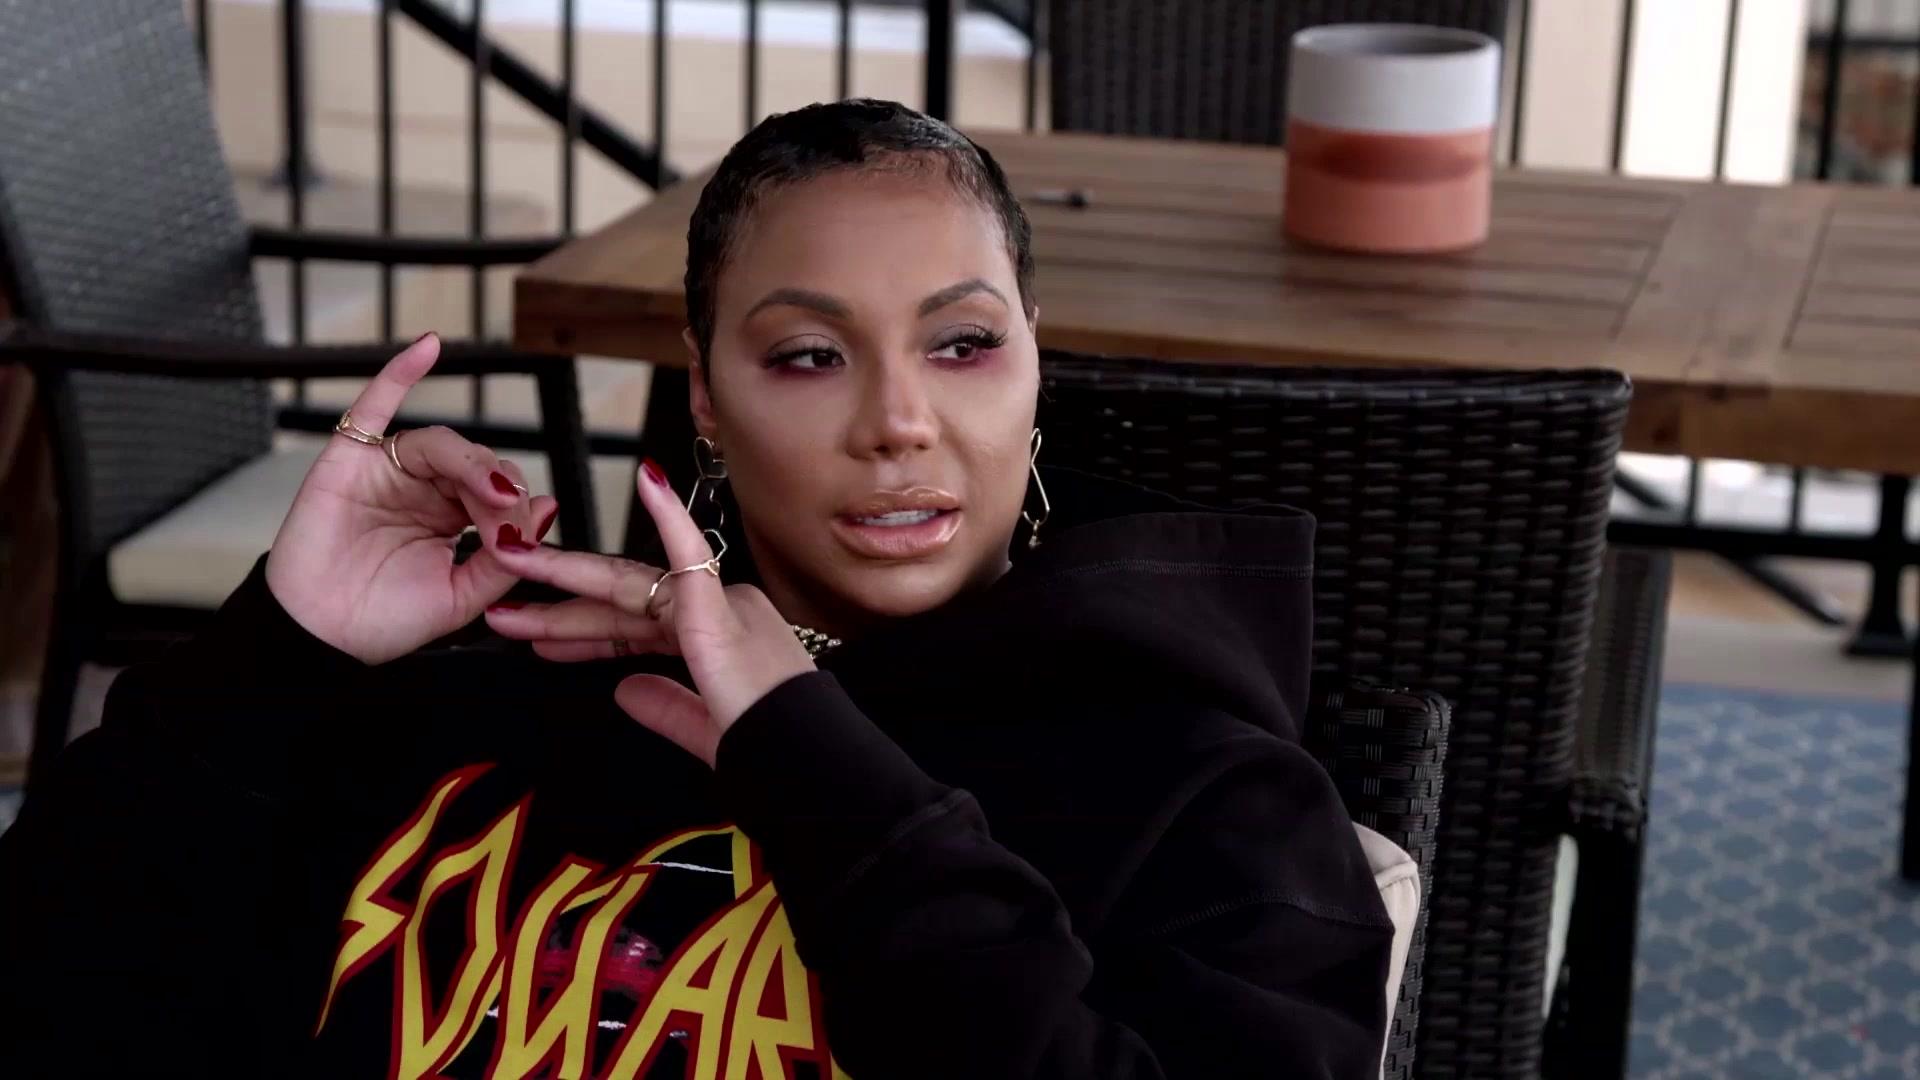 Tamar Completely Loses Her Voice!